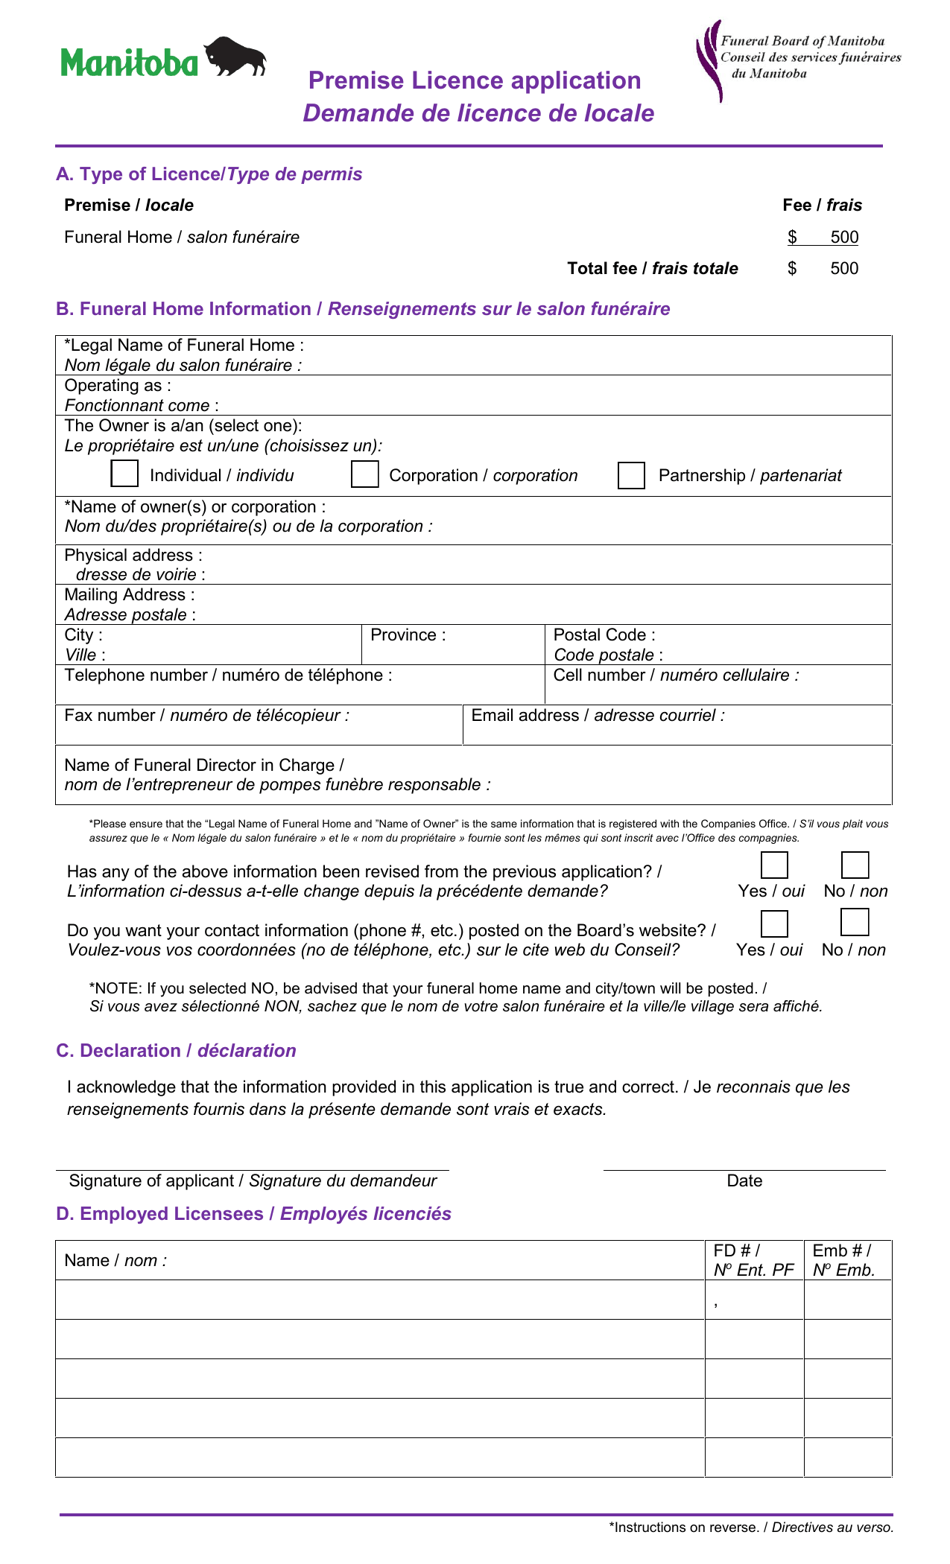 Premise Licence Application - Manitoba, Canada (English / French), Page 1